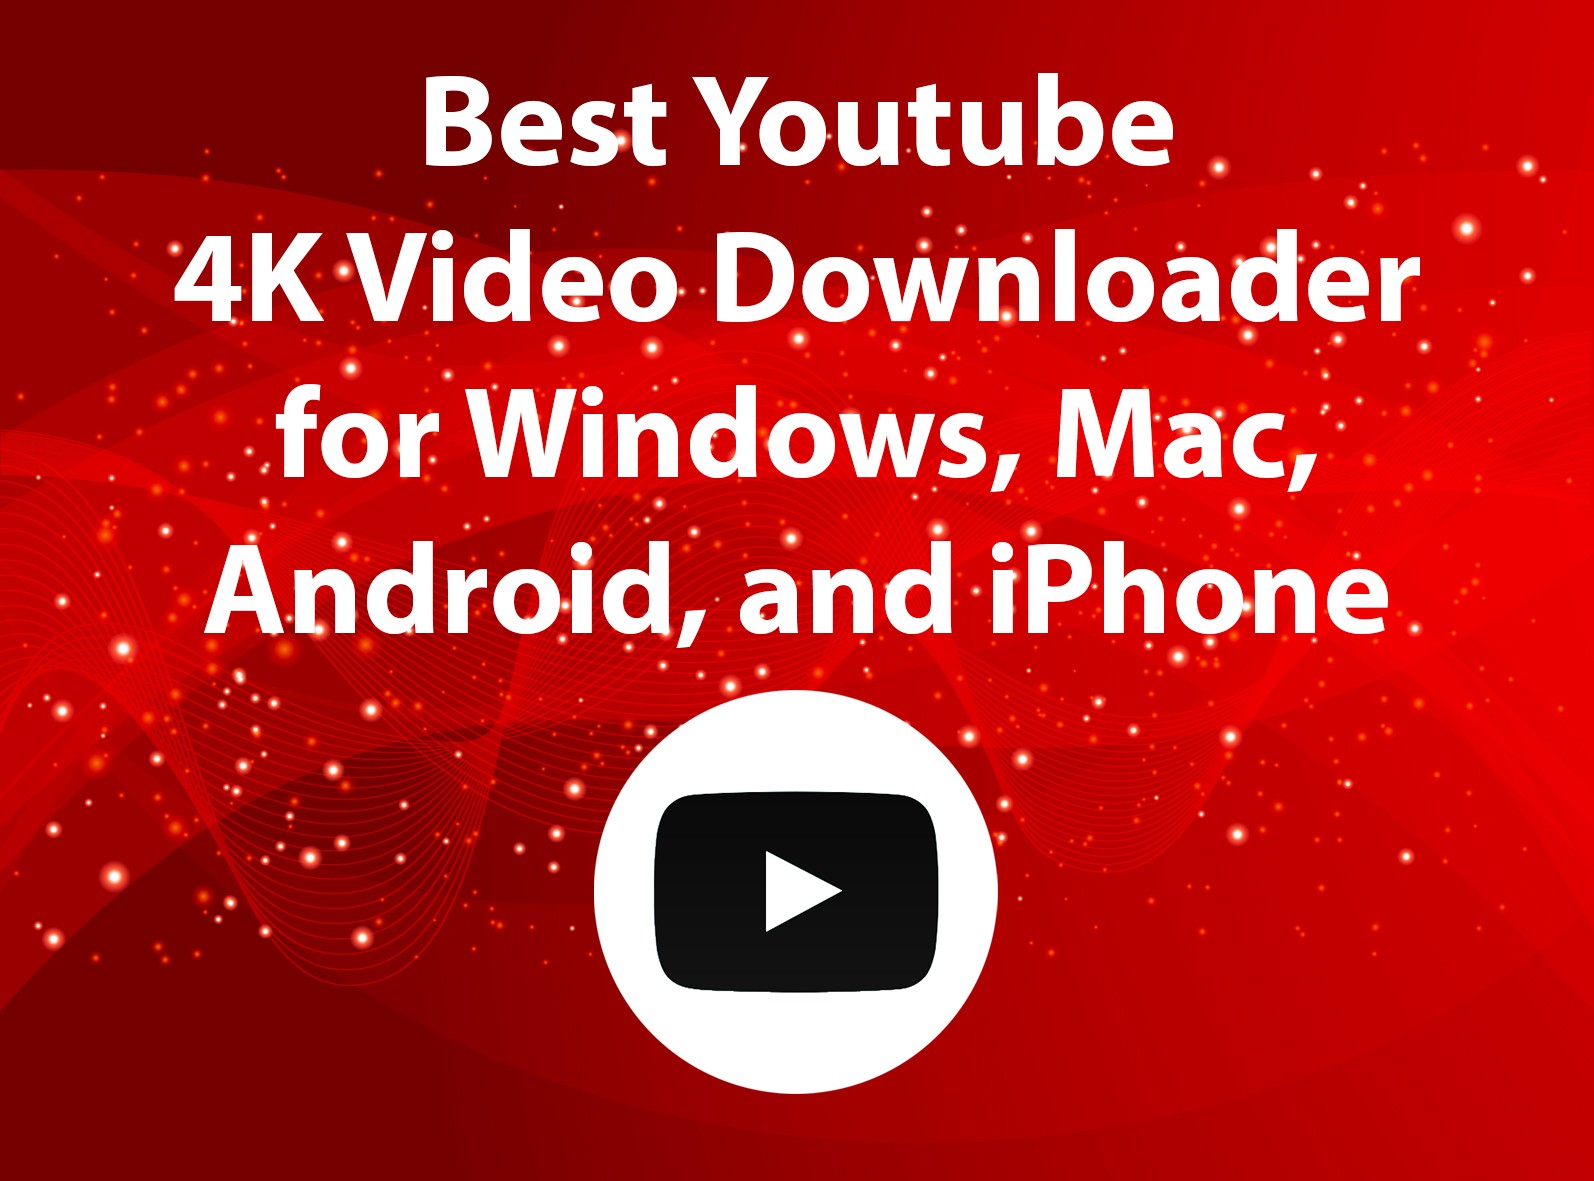 Best Youtube 4k video downloader for Windows, Mac, Android, and iPhone